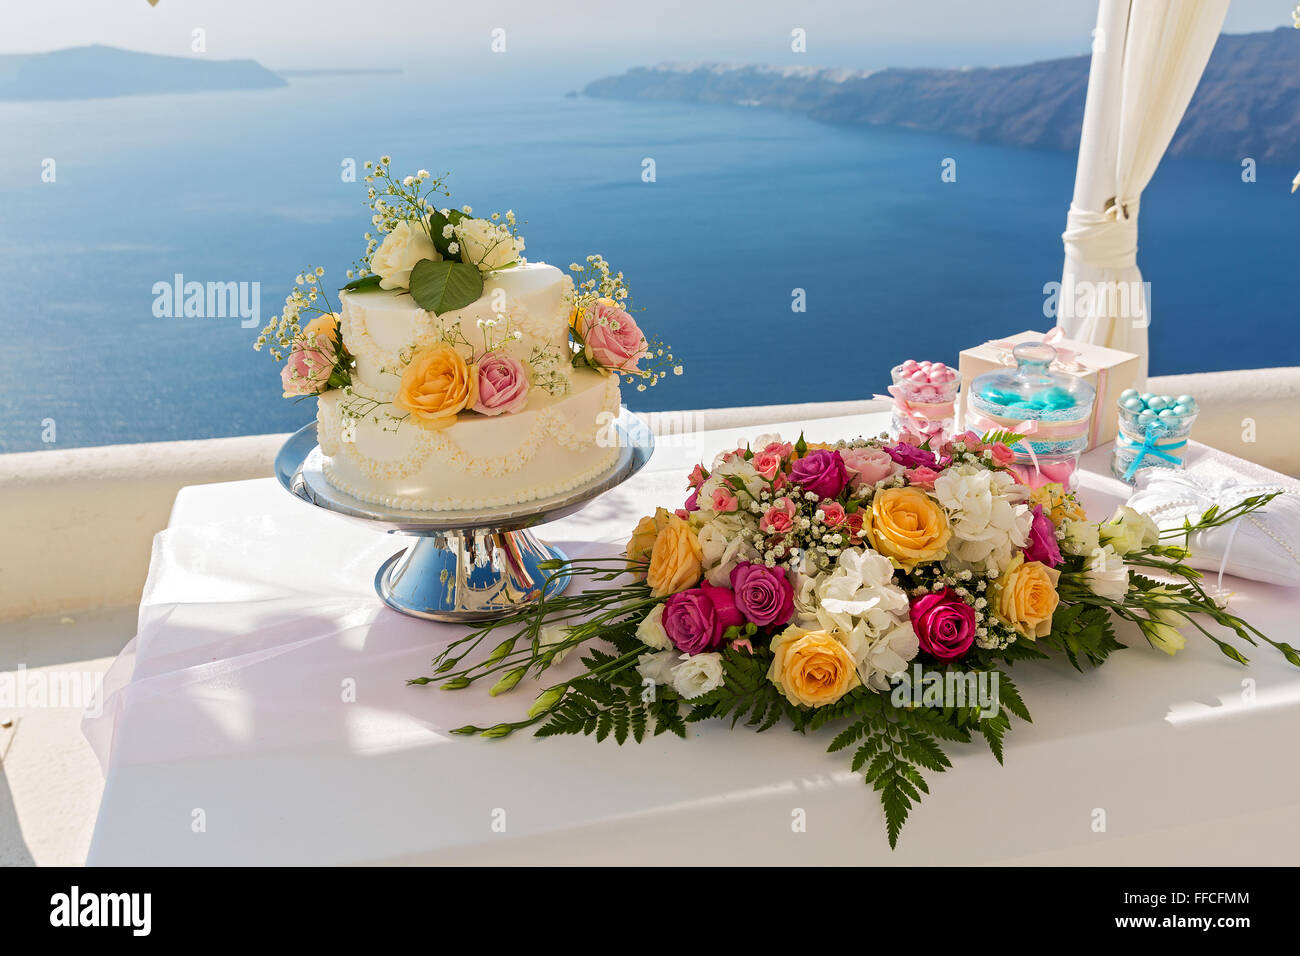 Wedding cake and bouquets of flowers on the table, against the sea. Greece. Stock Photo